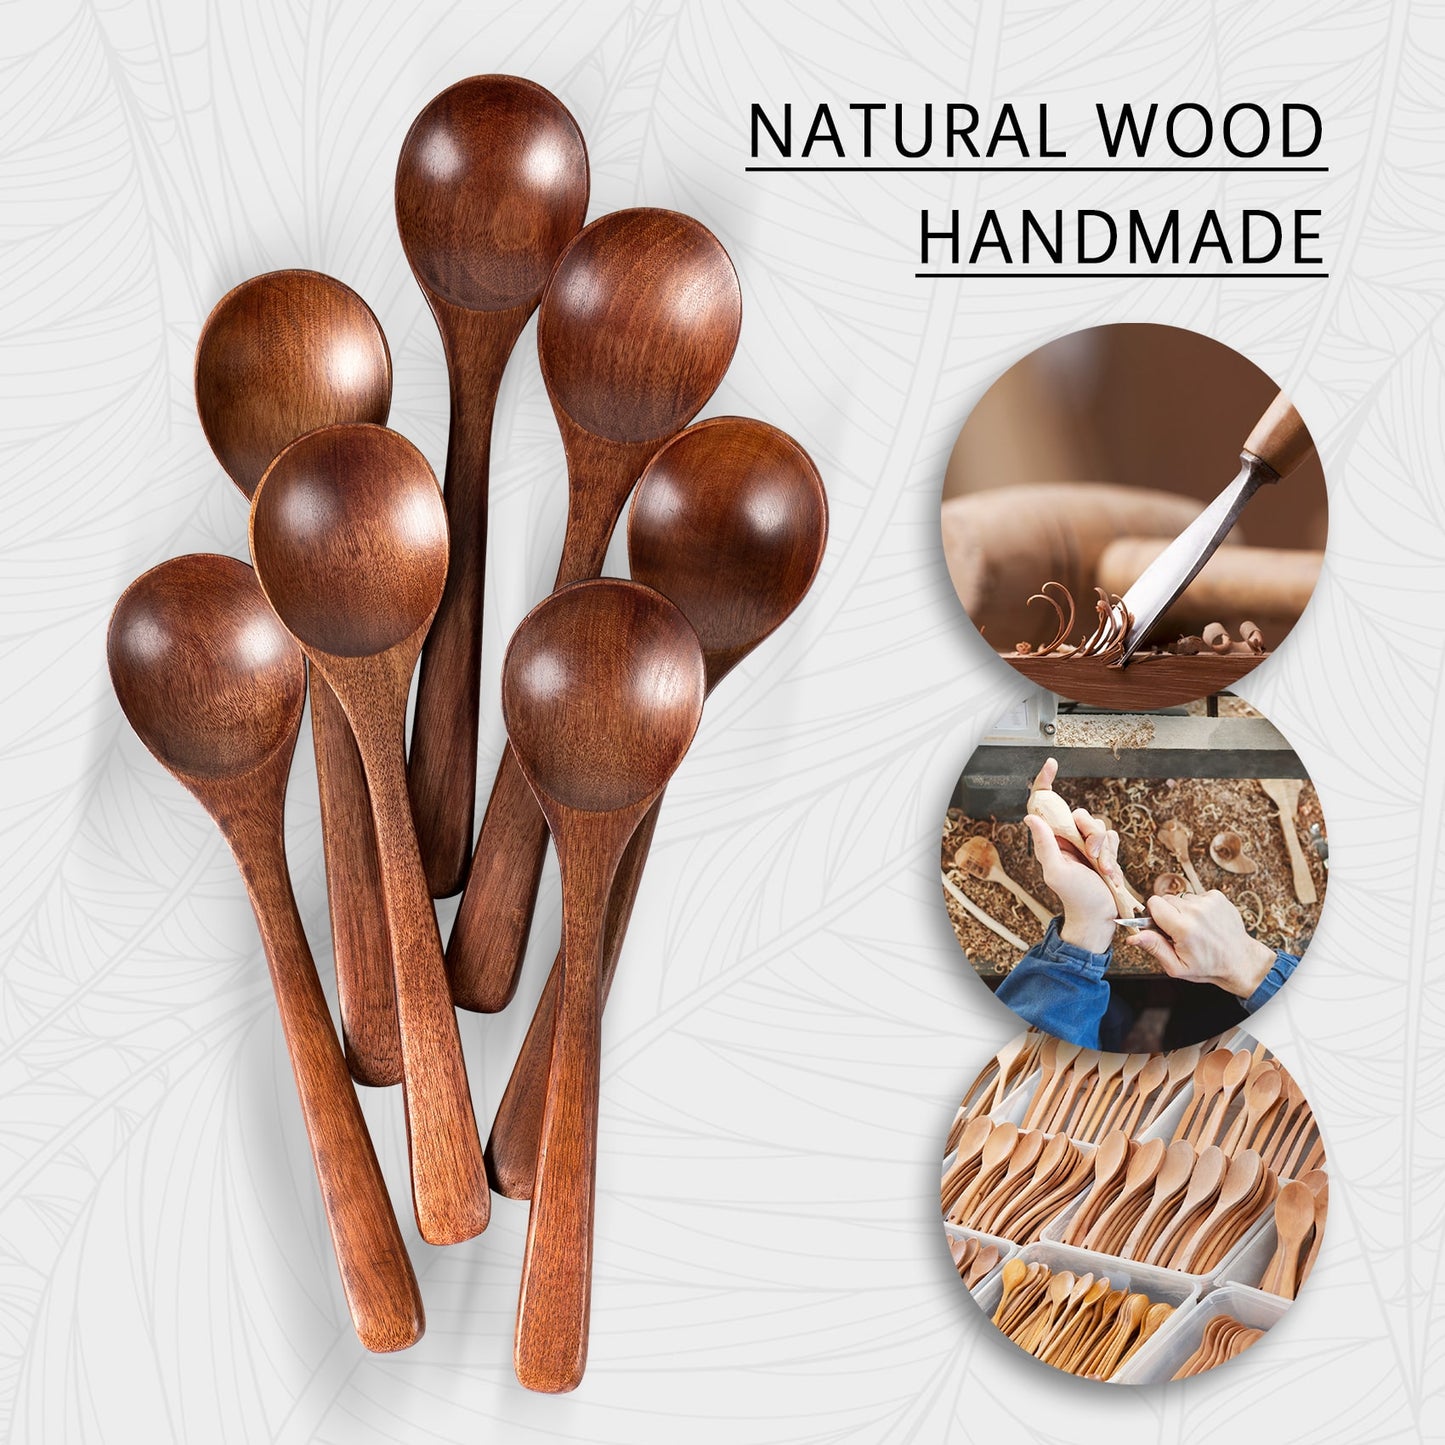 Showing the process of making 7inch small wooden spoons, which are made of hardwood polished in a 22-step process